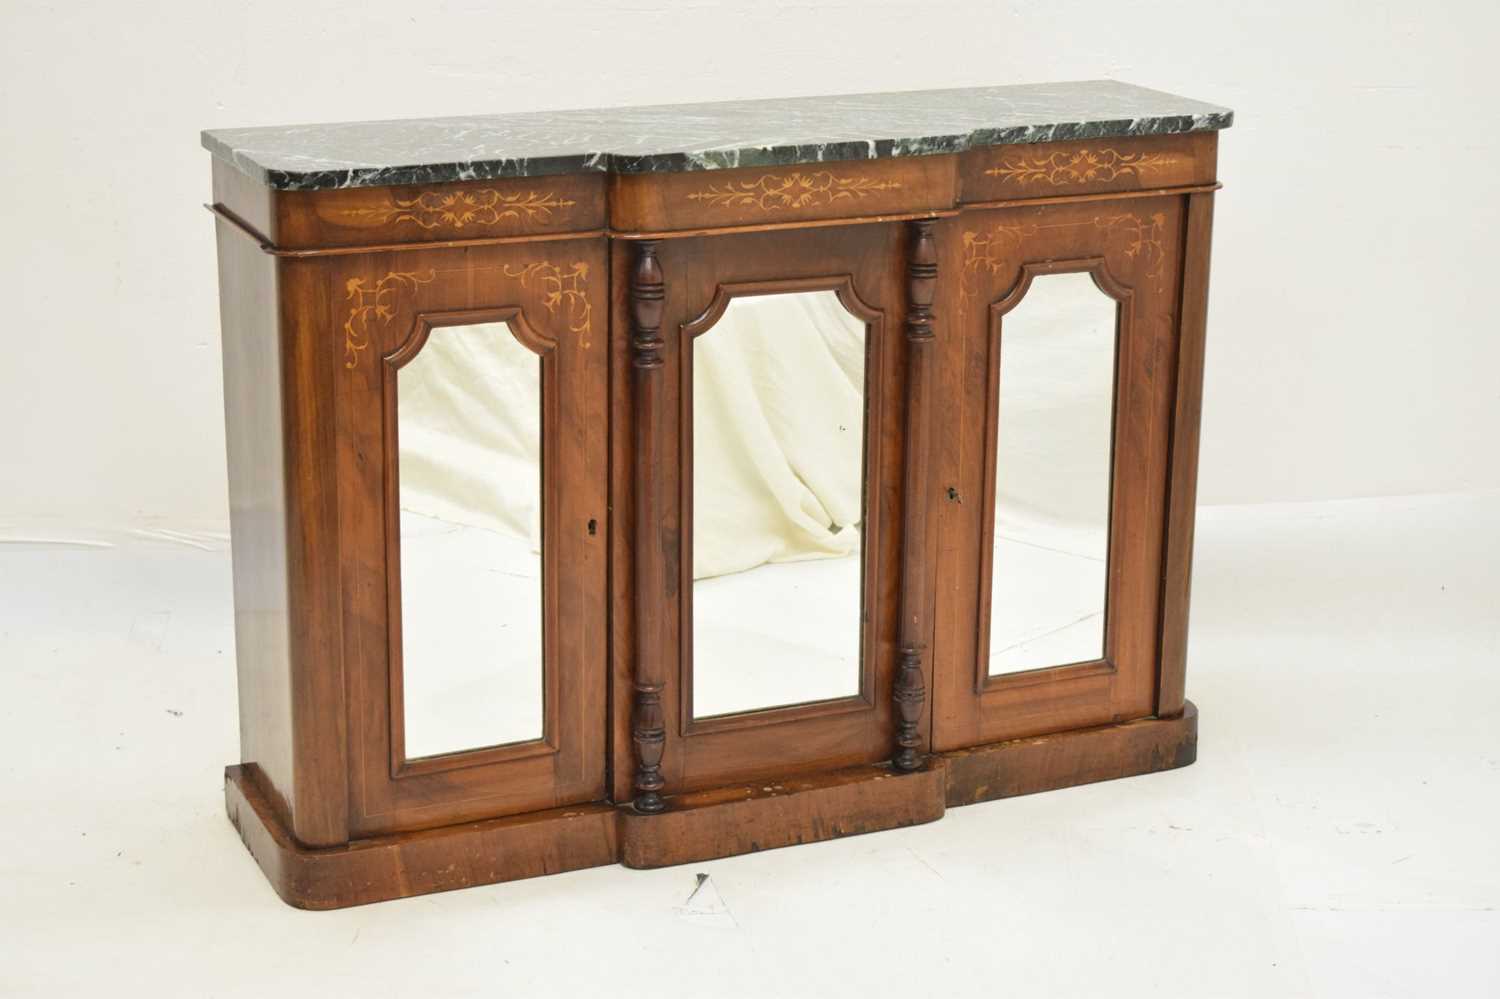 19th century inlaid walnut breakfront credenza or side cabinet with marble top - Image 2 of 13